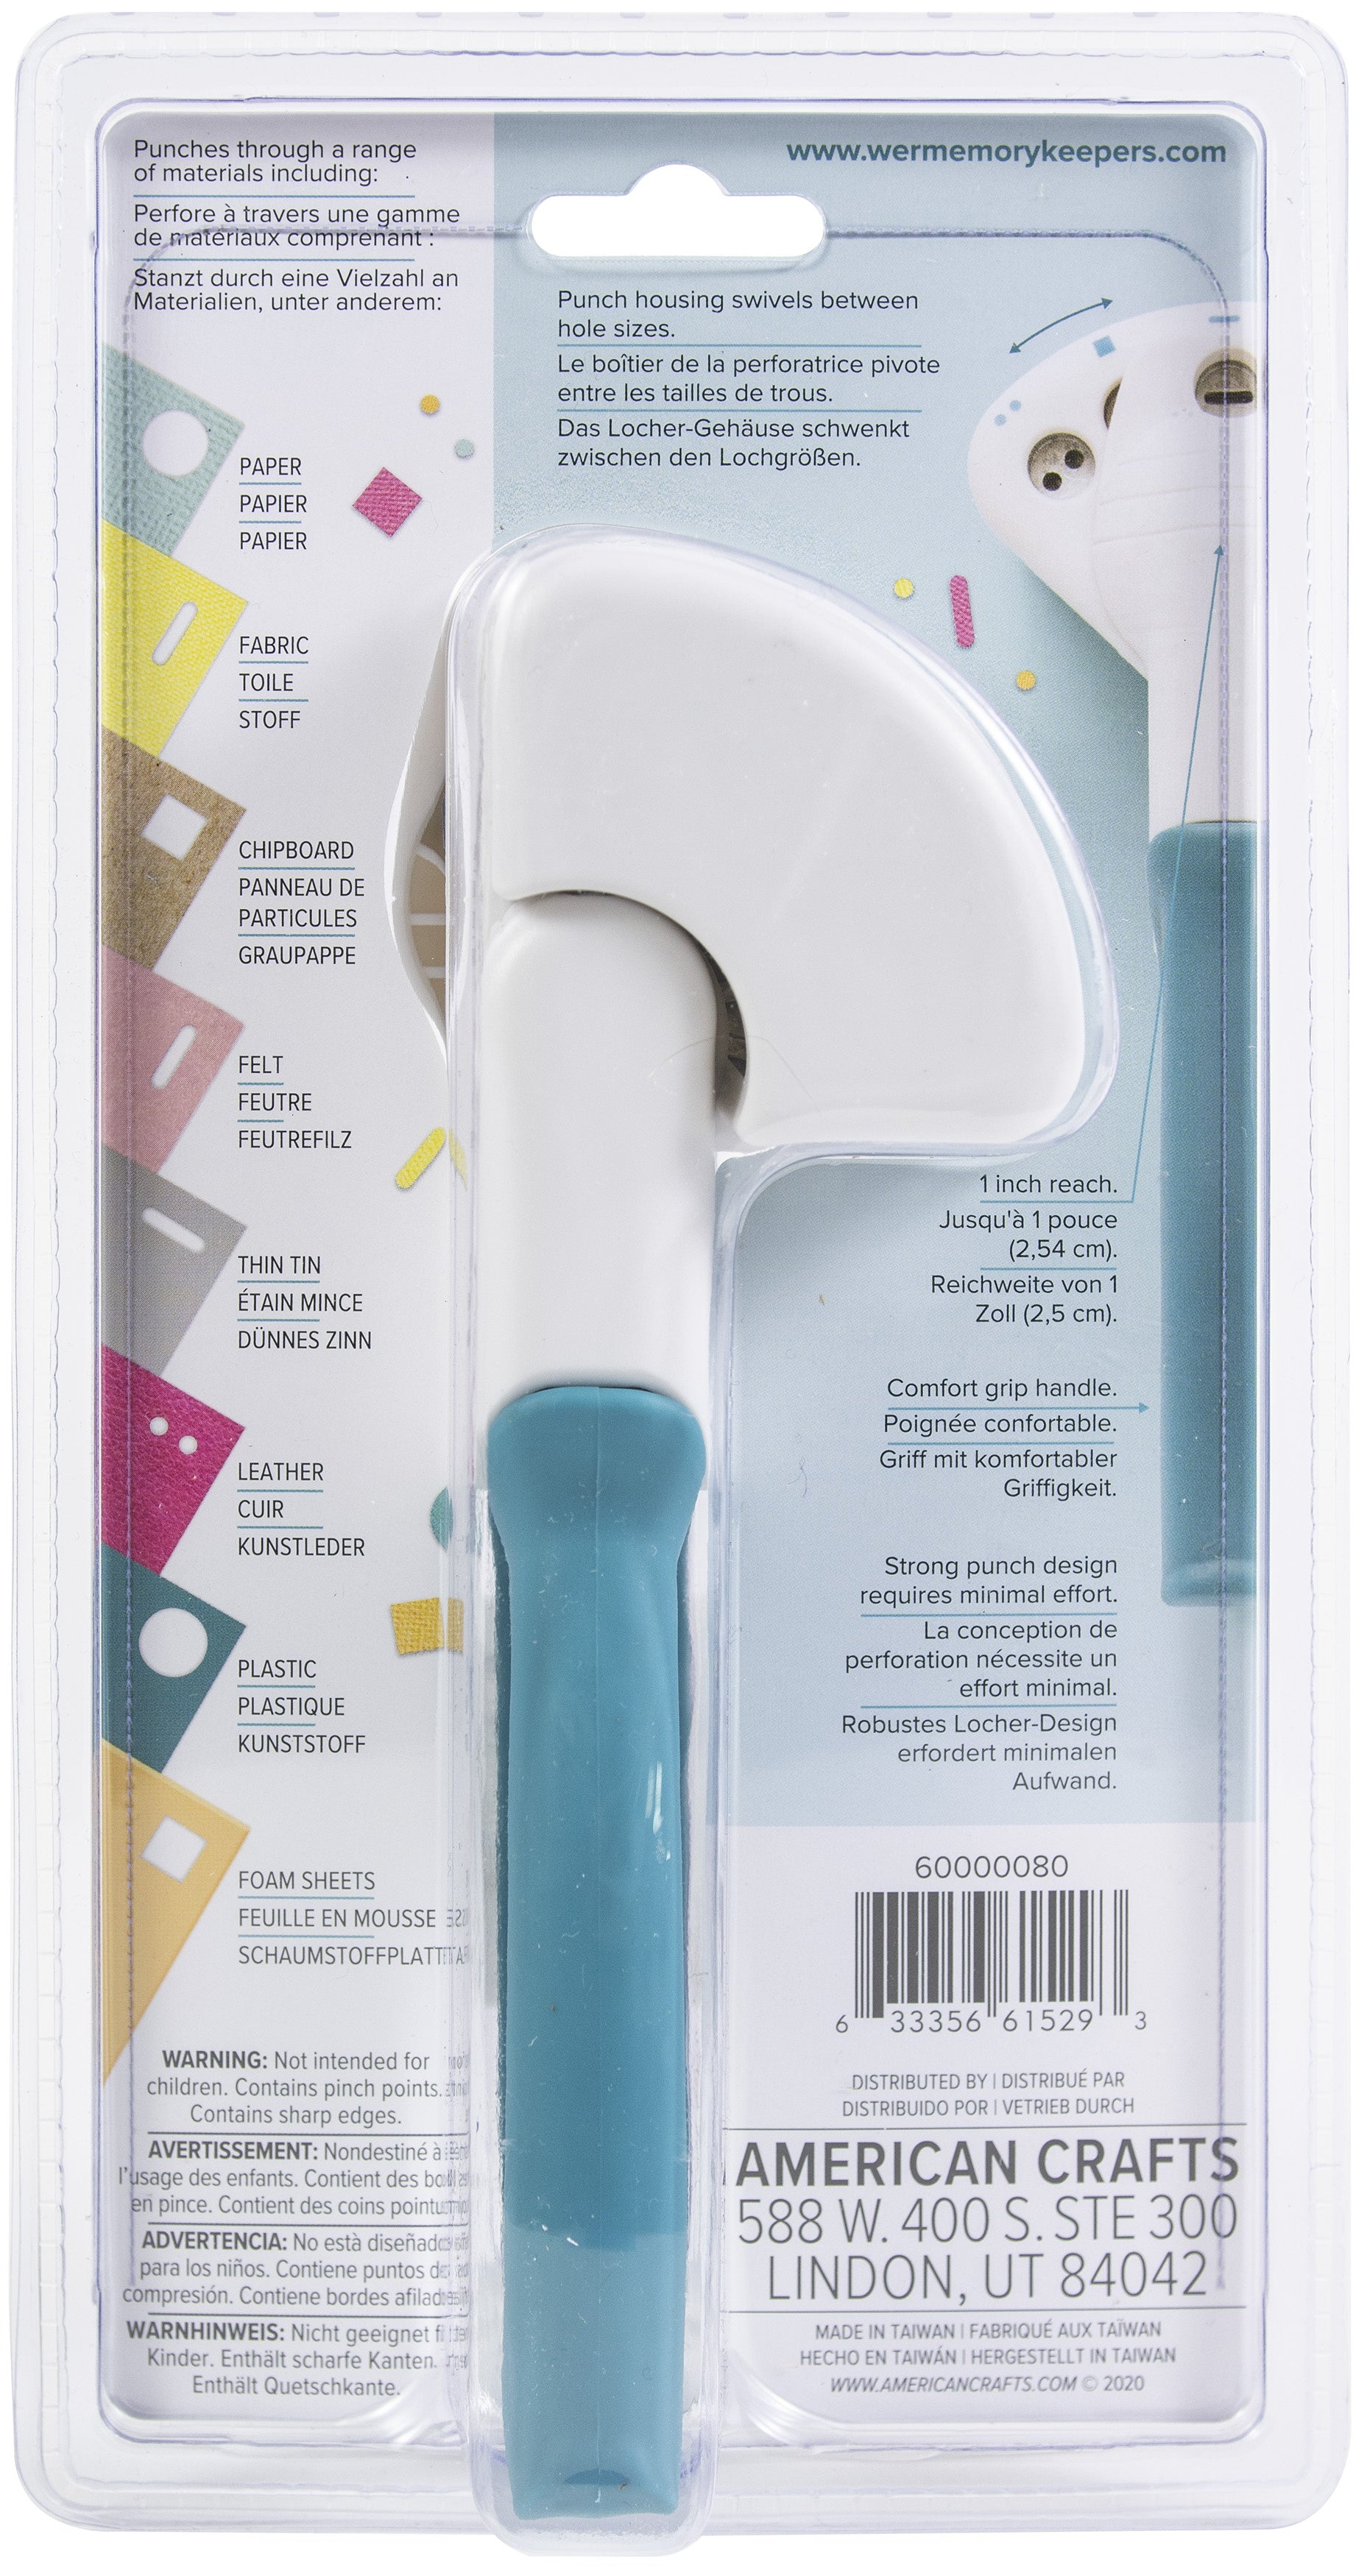 We R Memory Keepers Crop-A-Dile Multi-Punch - Utility